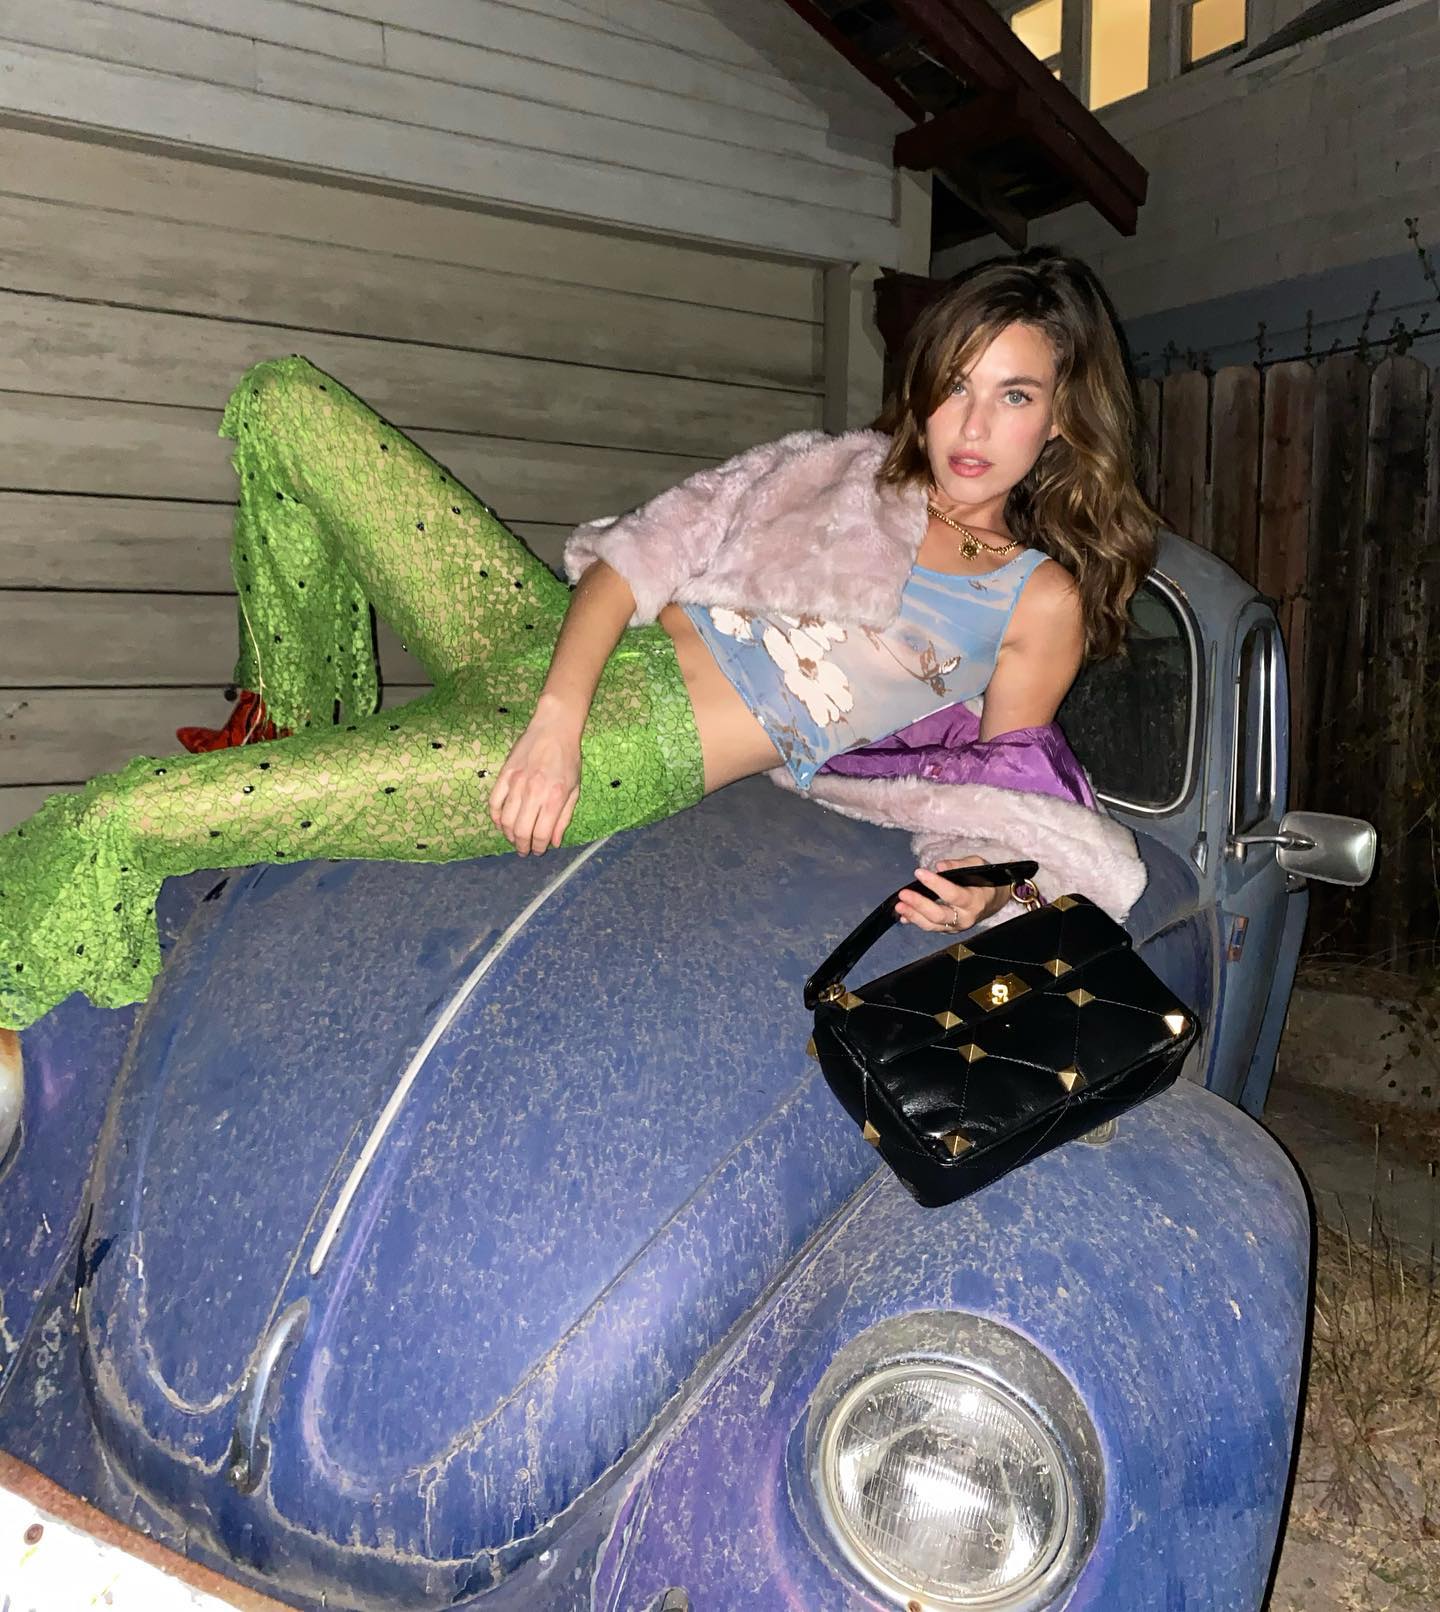 Rainey Qualley is Keeping Things Clean! - Photo 4